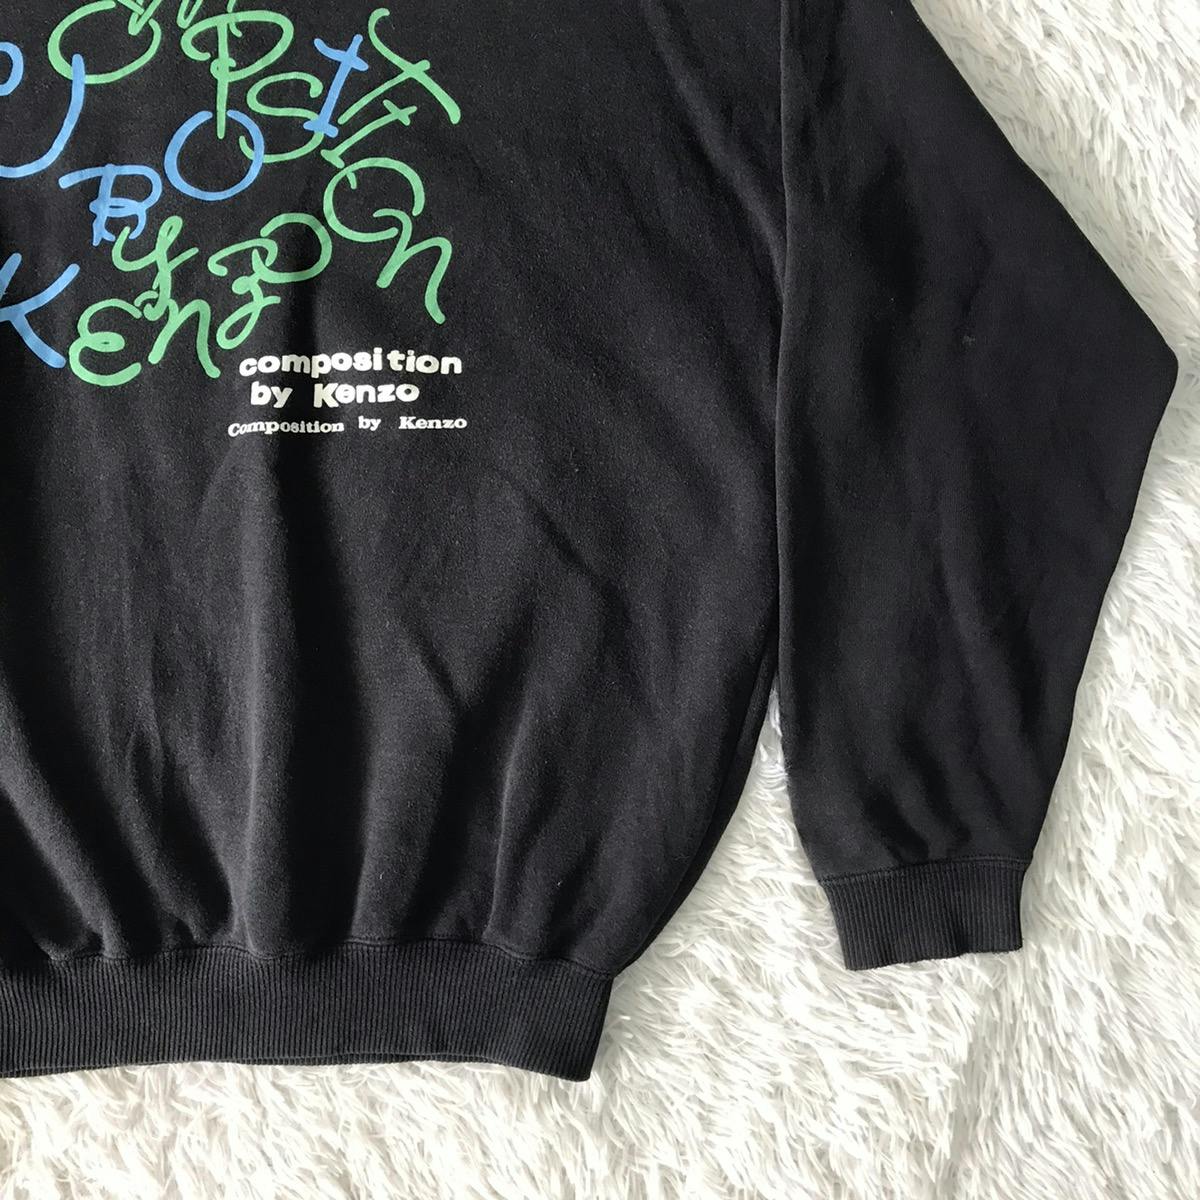 Composition By Kenzo Sweatshirt Made in Japan - 8